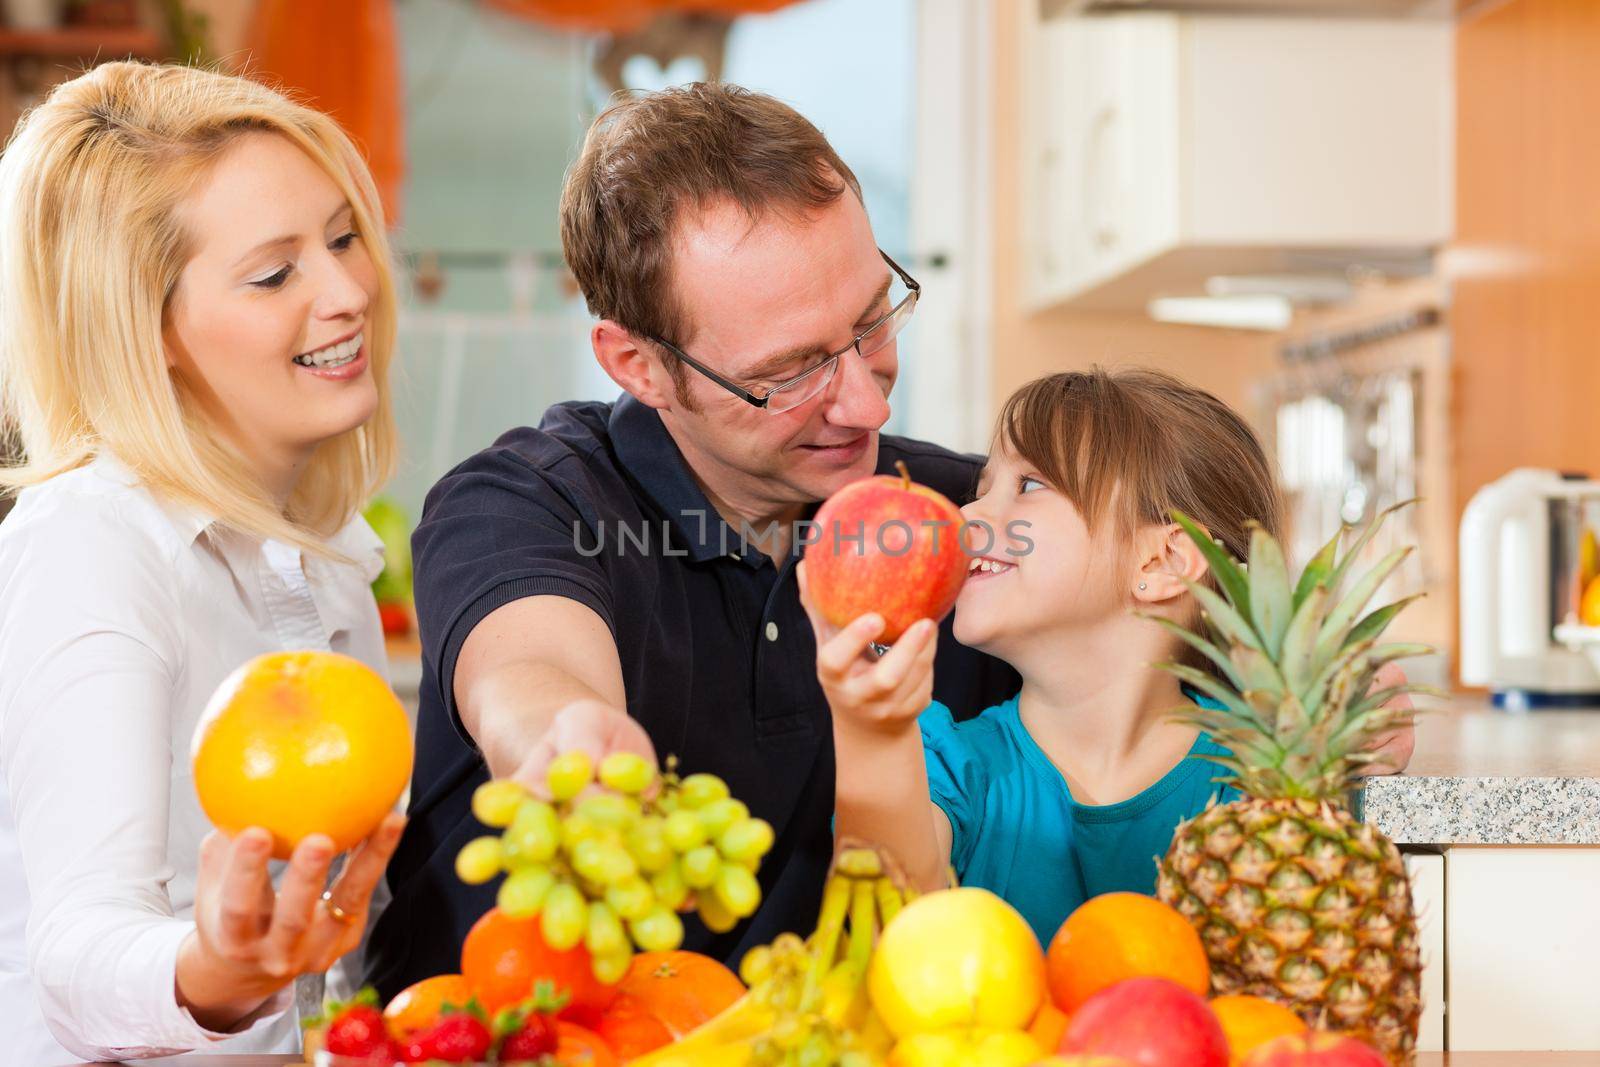 Family and healthy nutrition by Kzenon